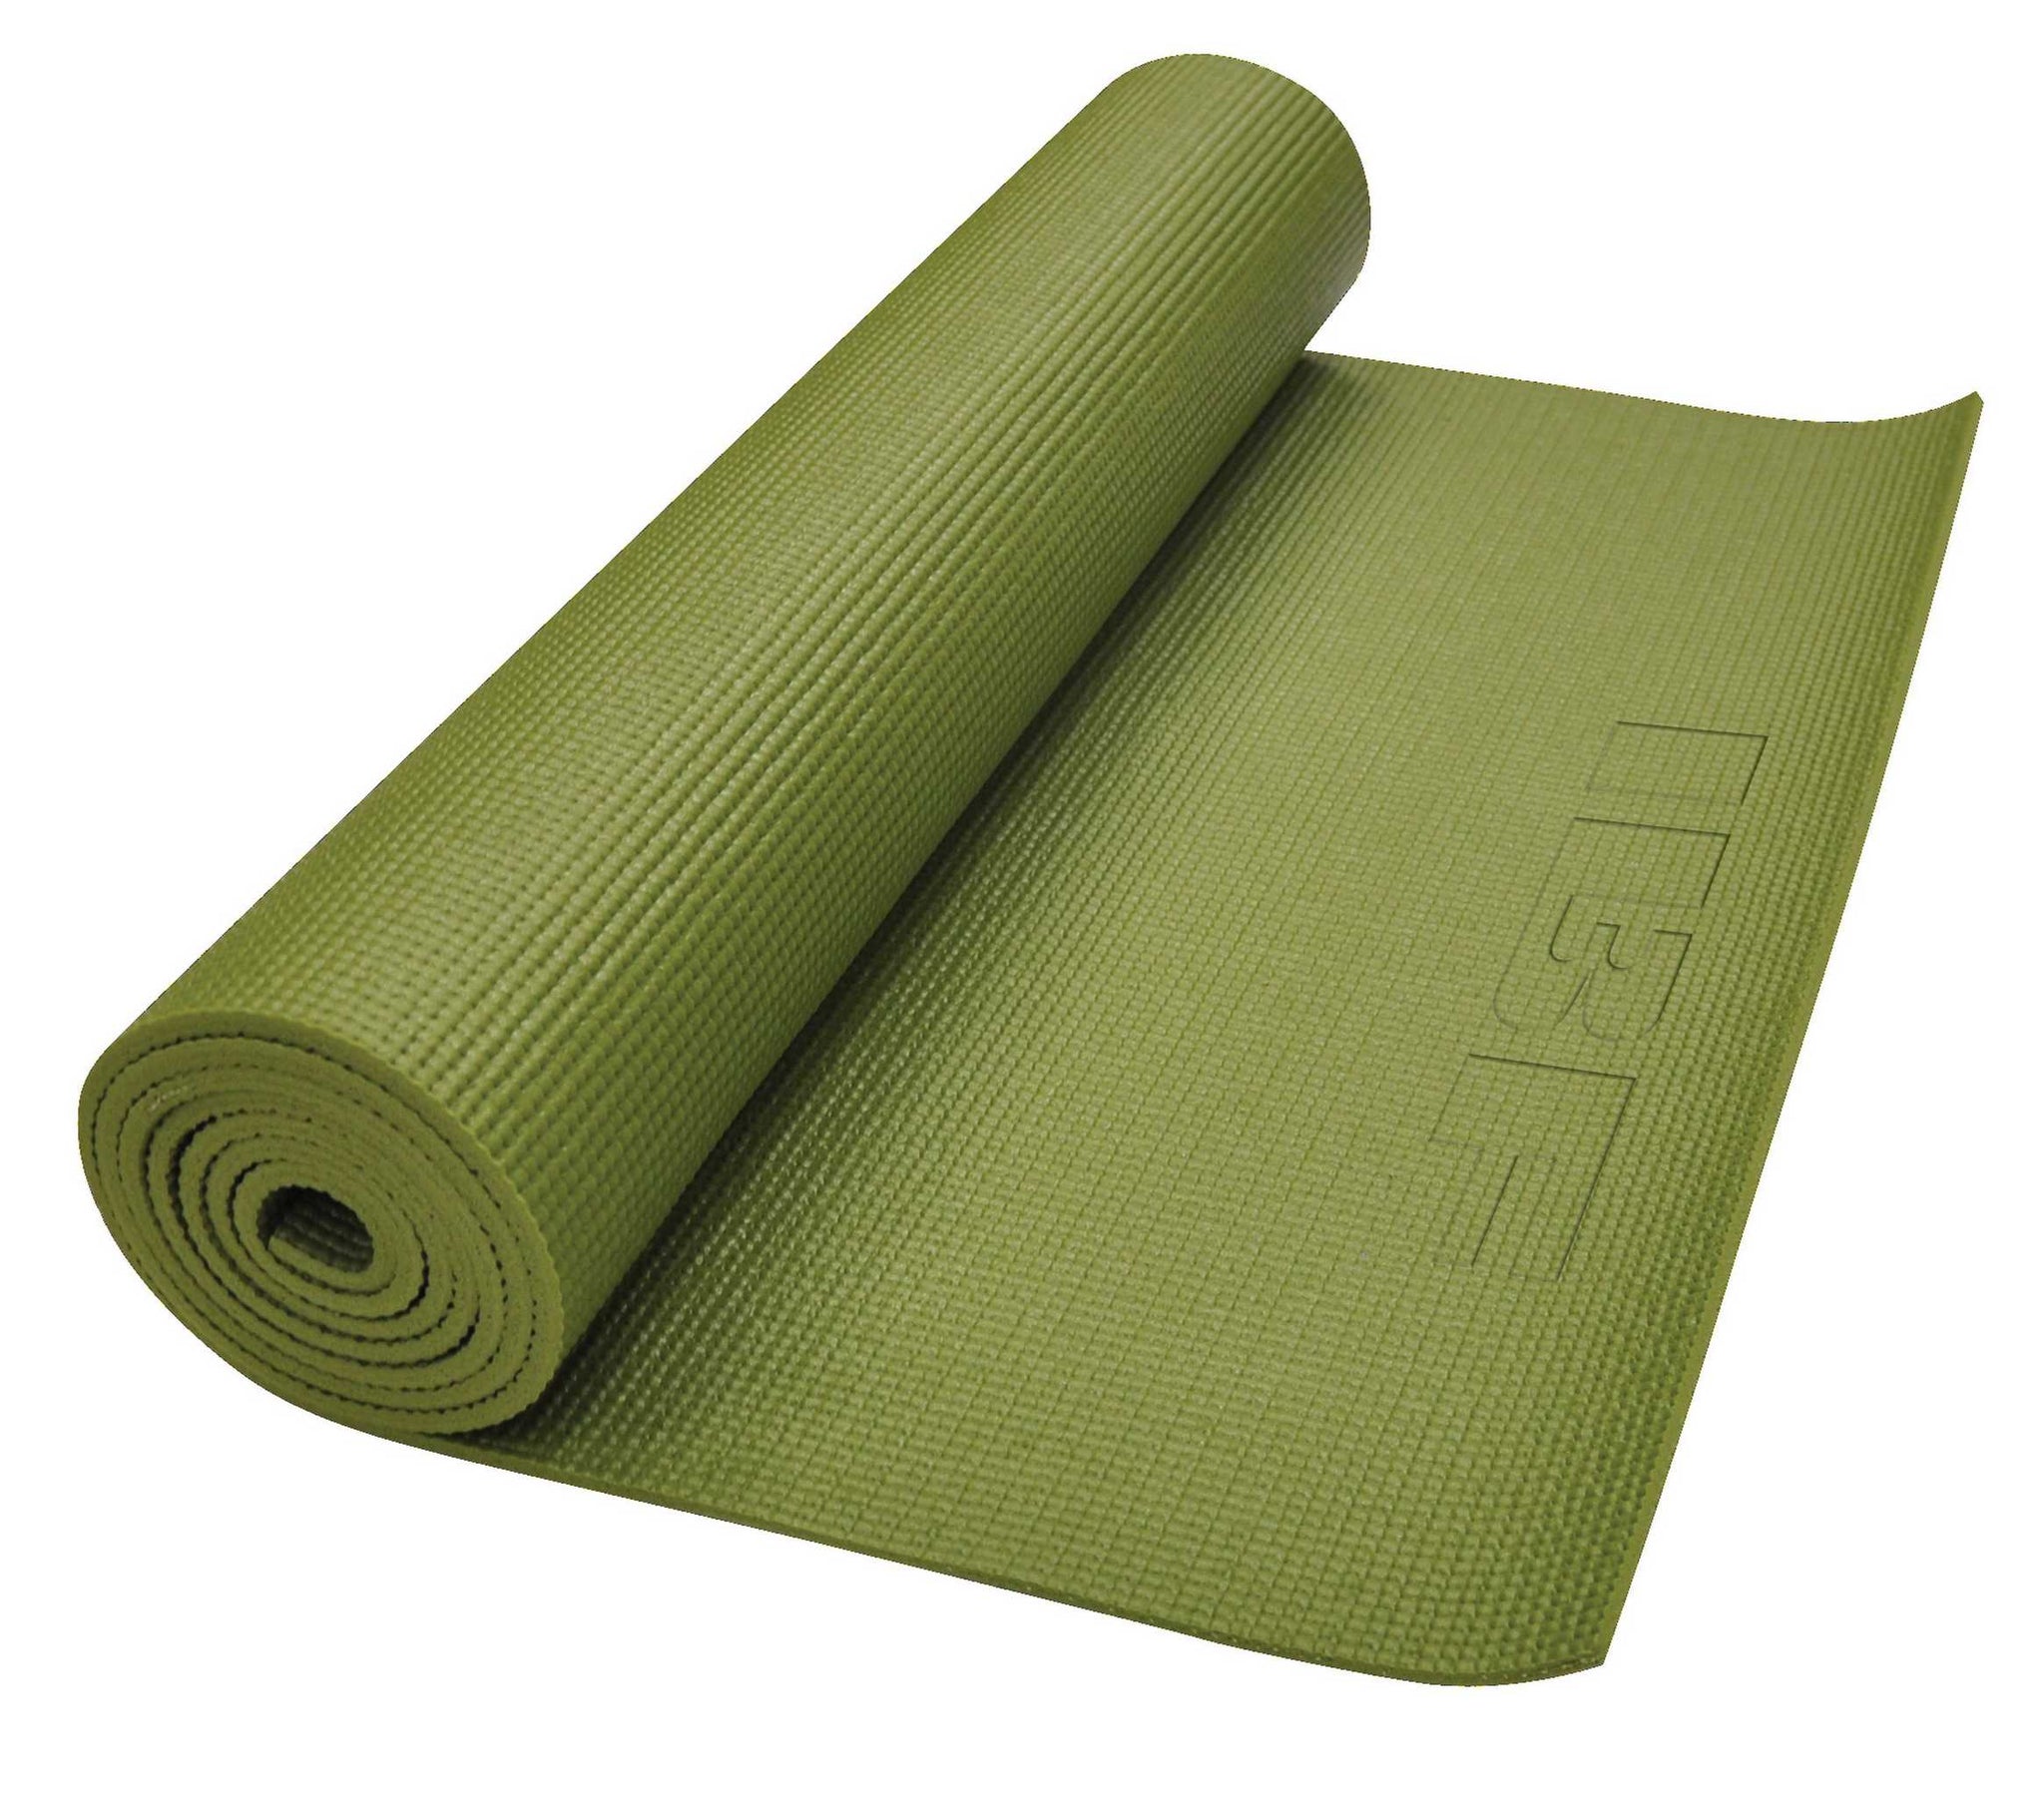 Extra-Thick Yoga Mat, 6 mm, Green